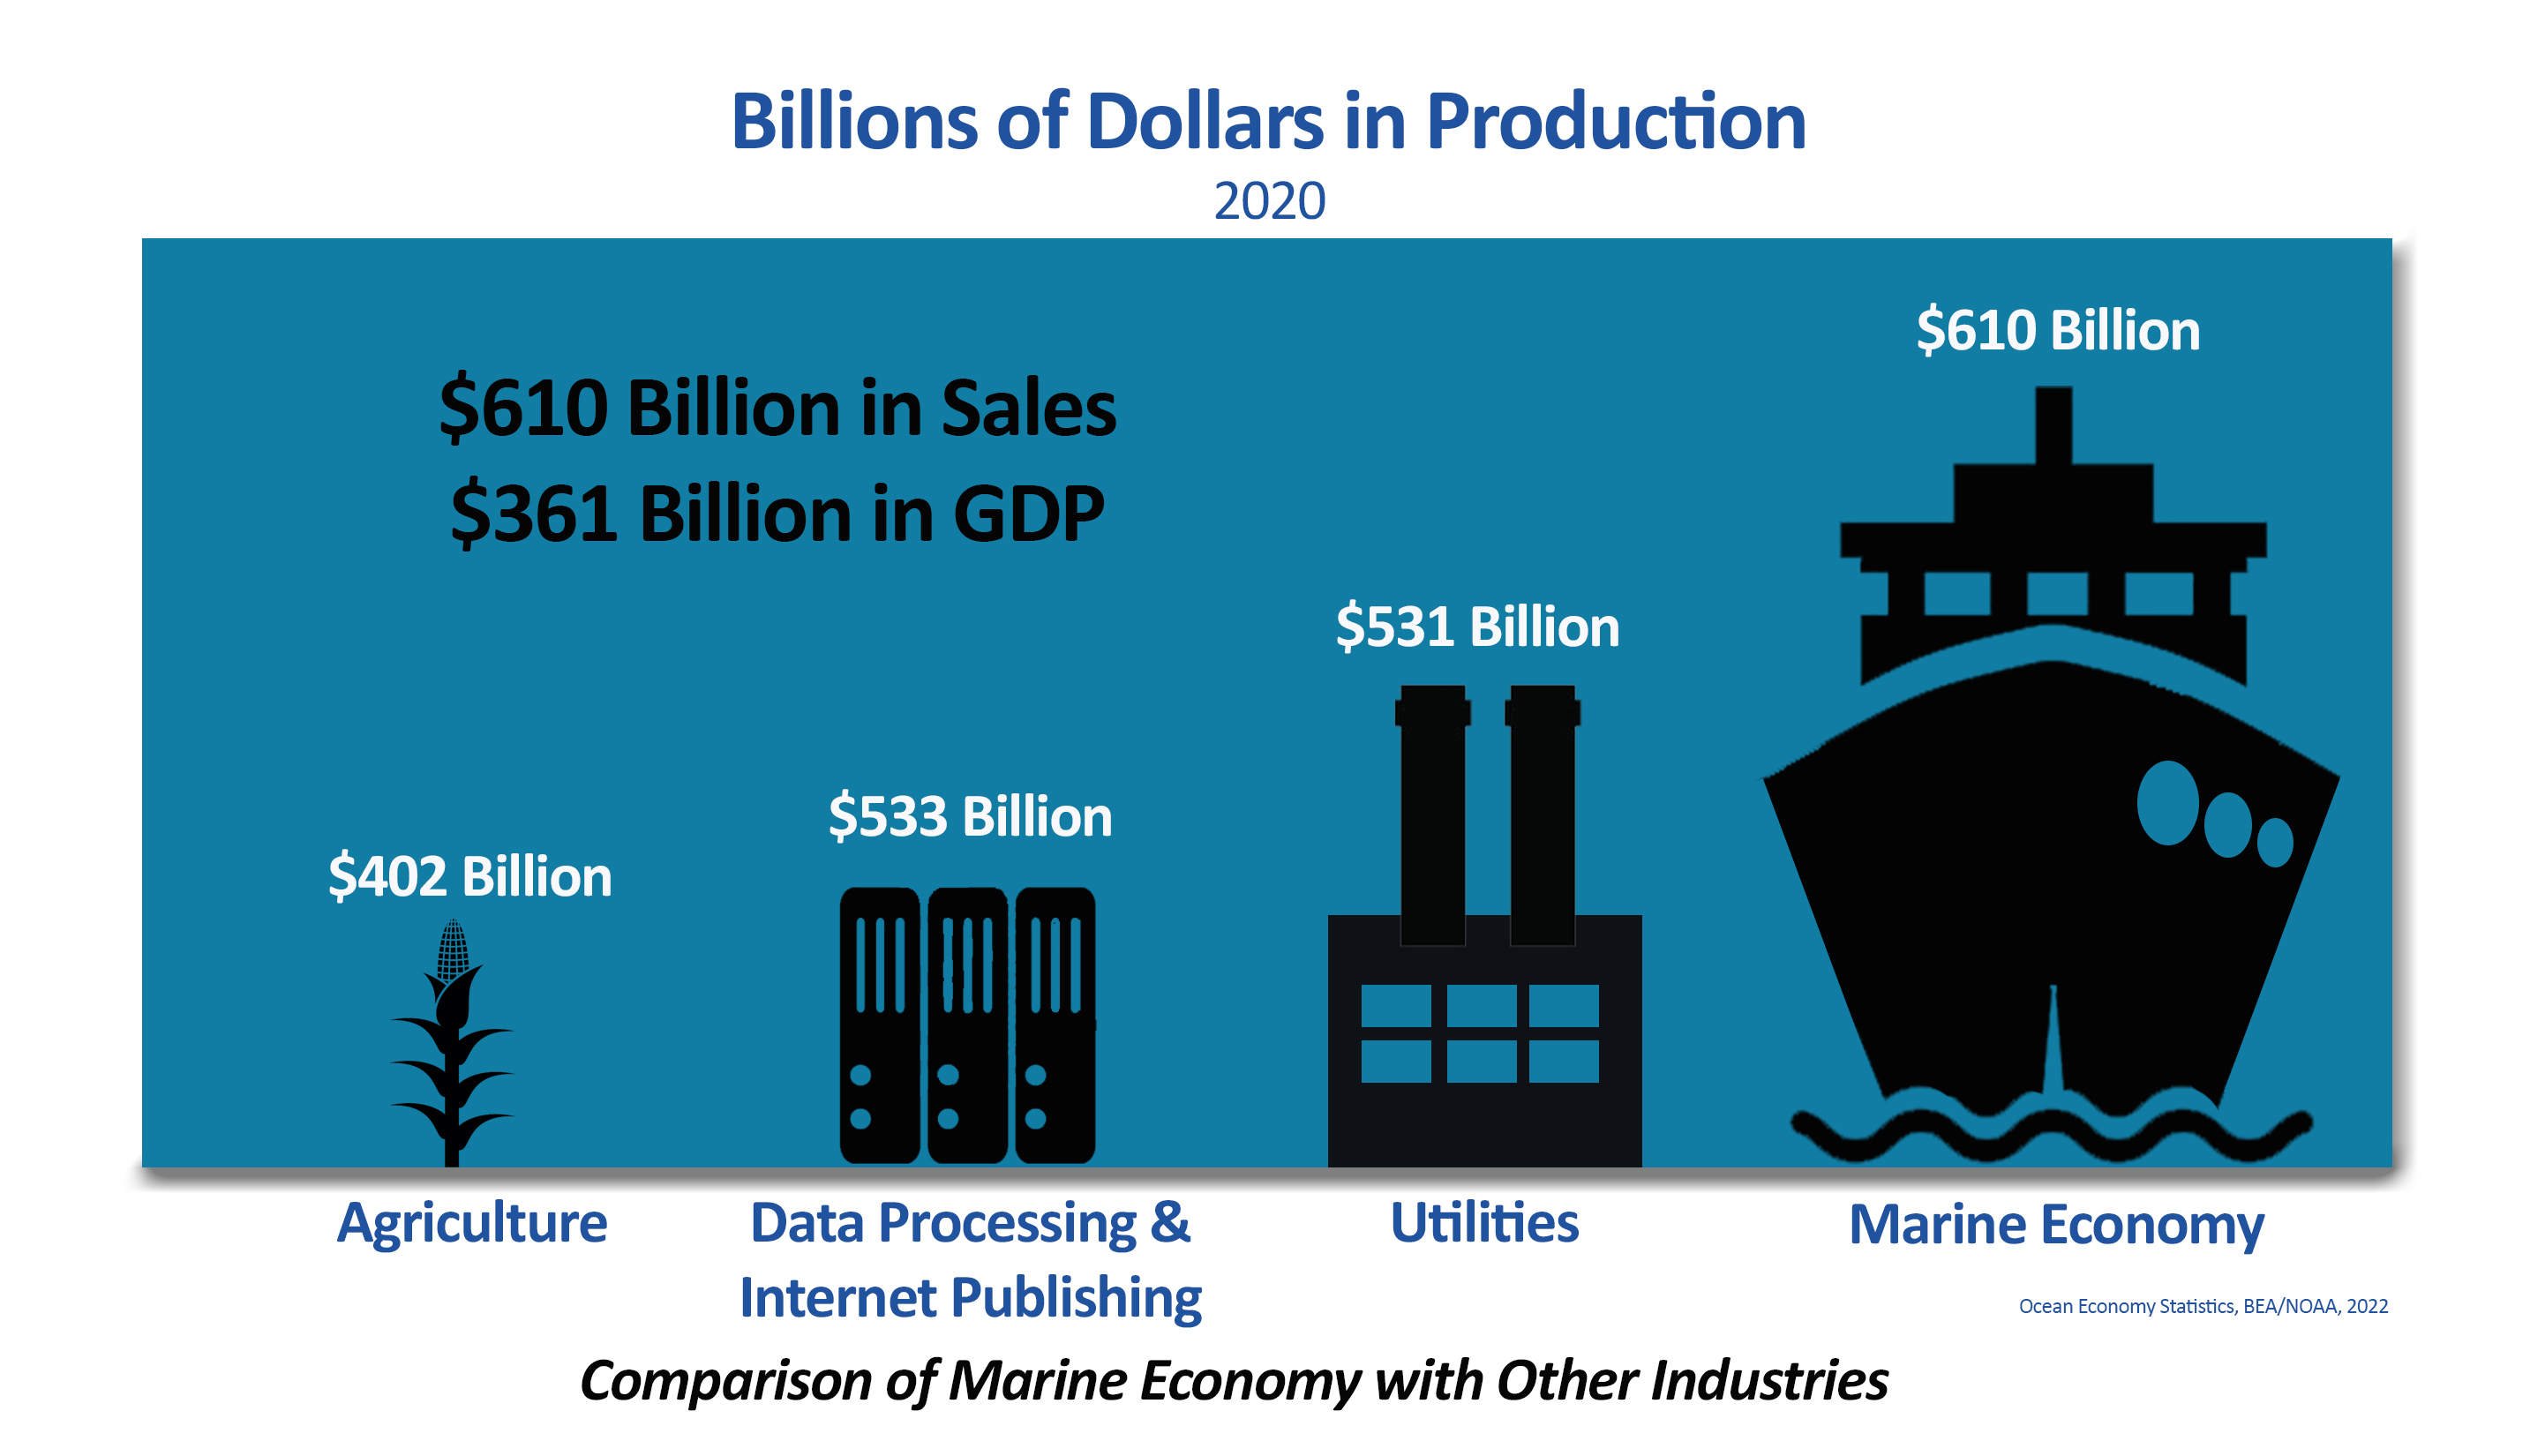 Infographic showing production in 2020 of major sectors such as agriculture and utilities, with the marine economy being the largest at $610 billion. 